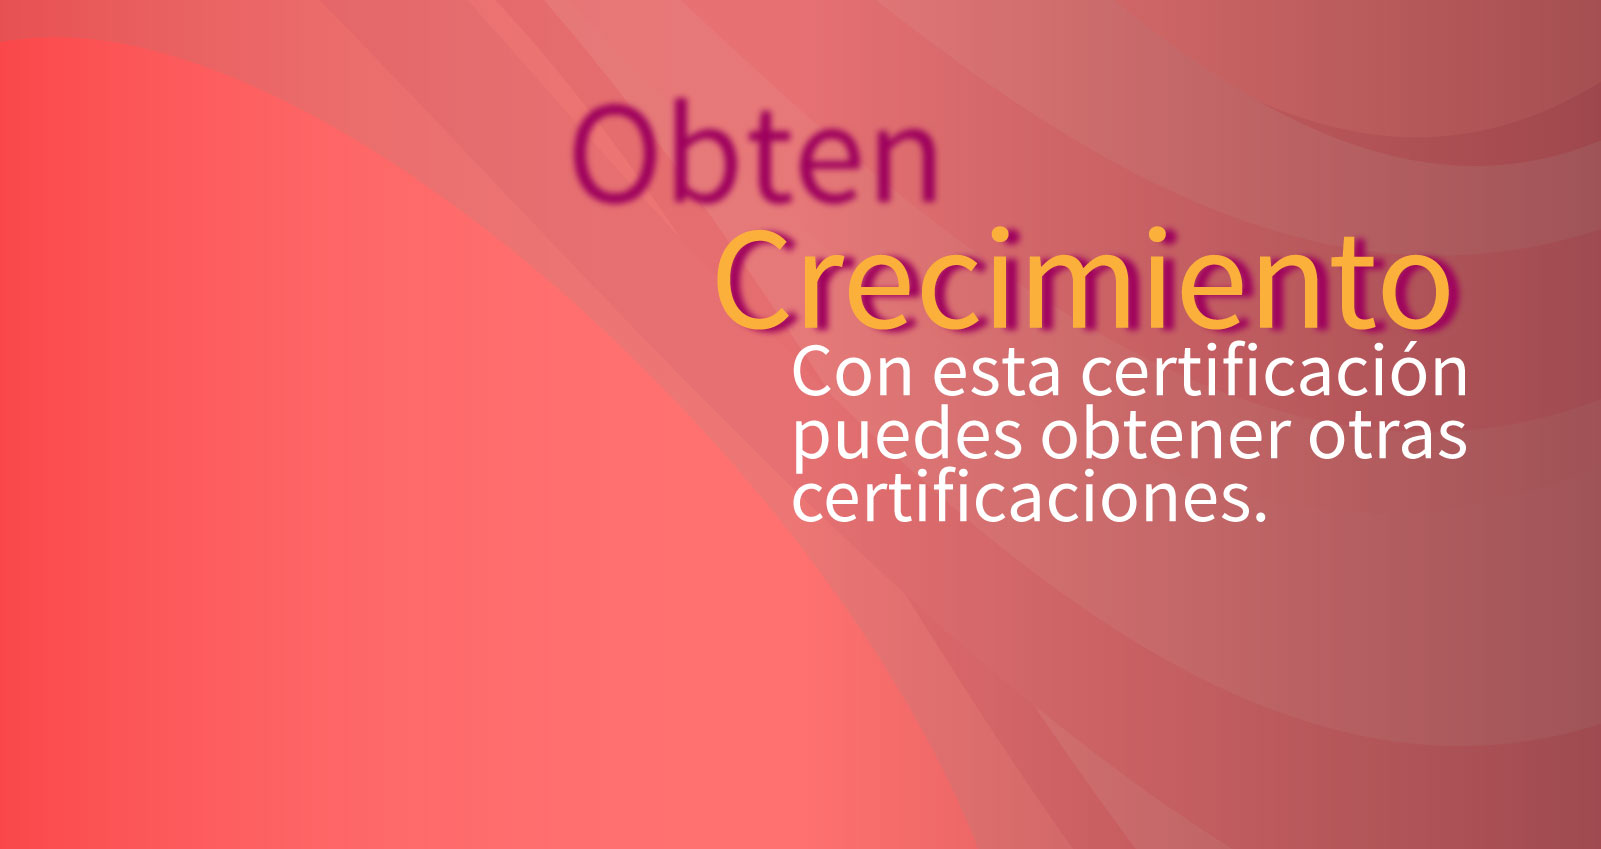 Certification in Clinical Nutrition